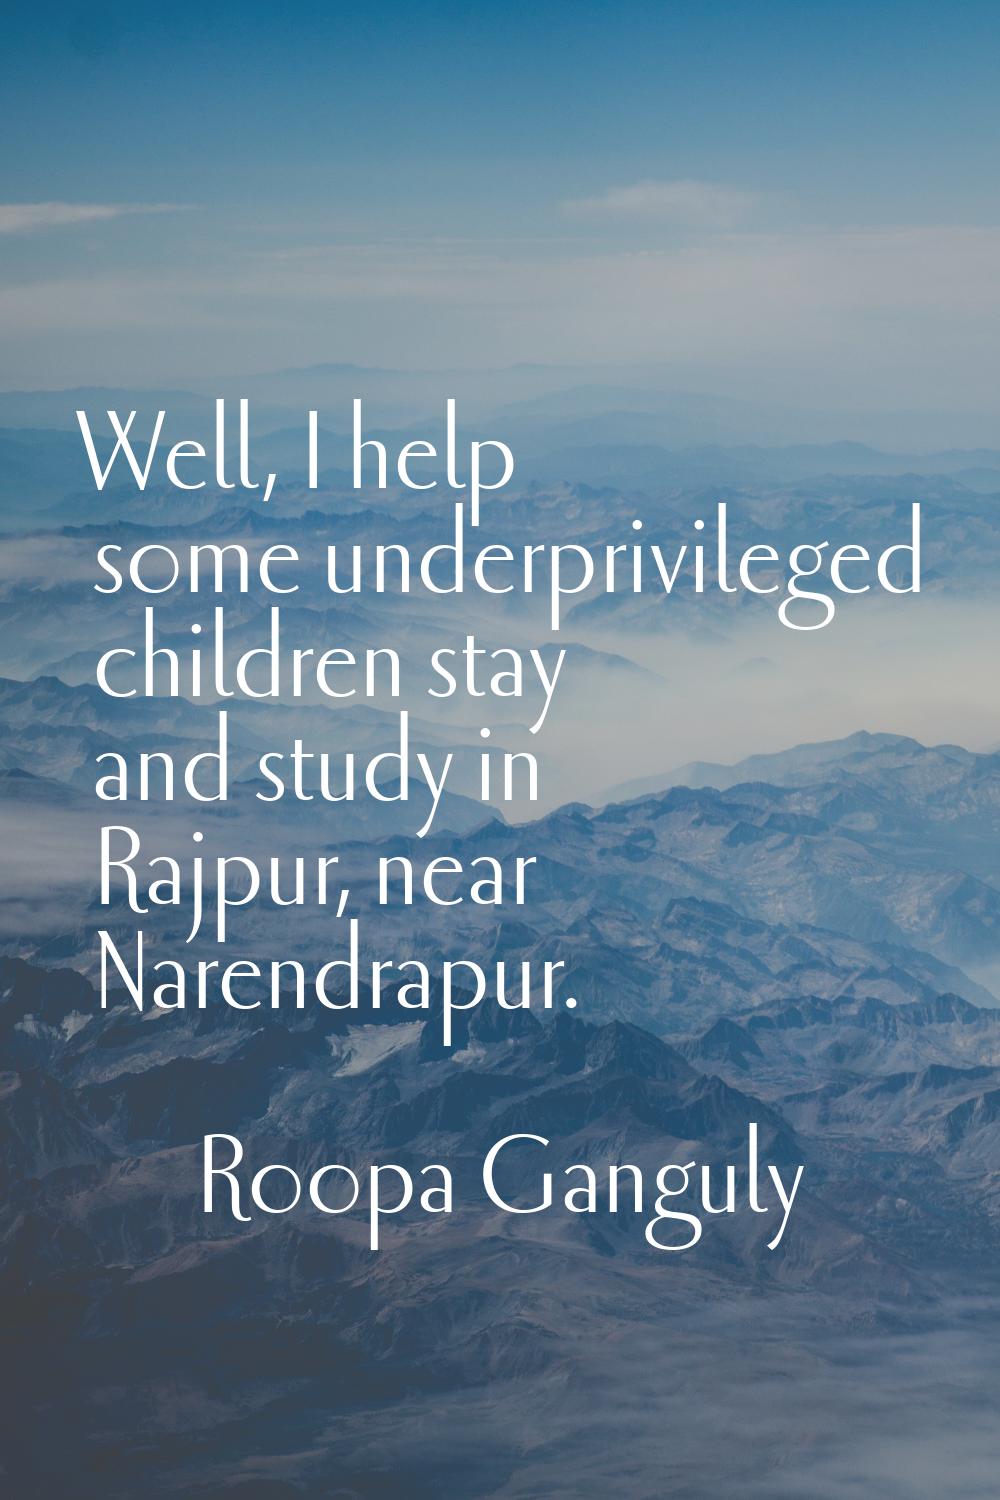 Well, I help some underprivileged children stay and study in Rajpur, near Narendrapur.